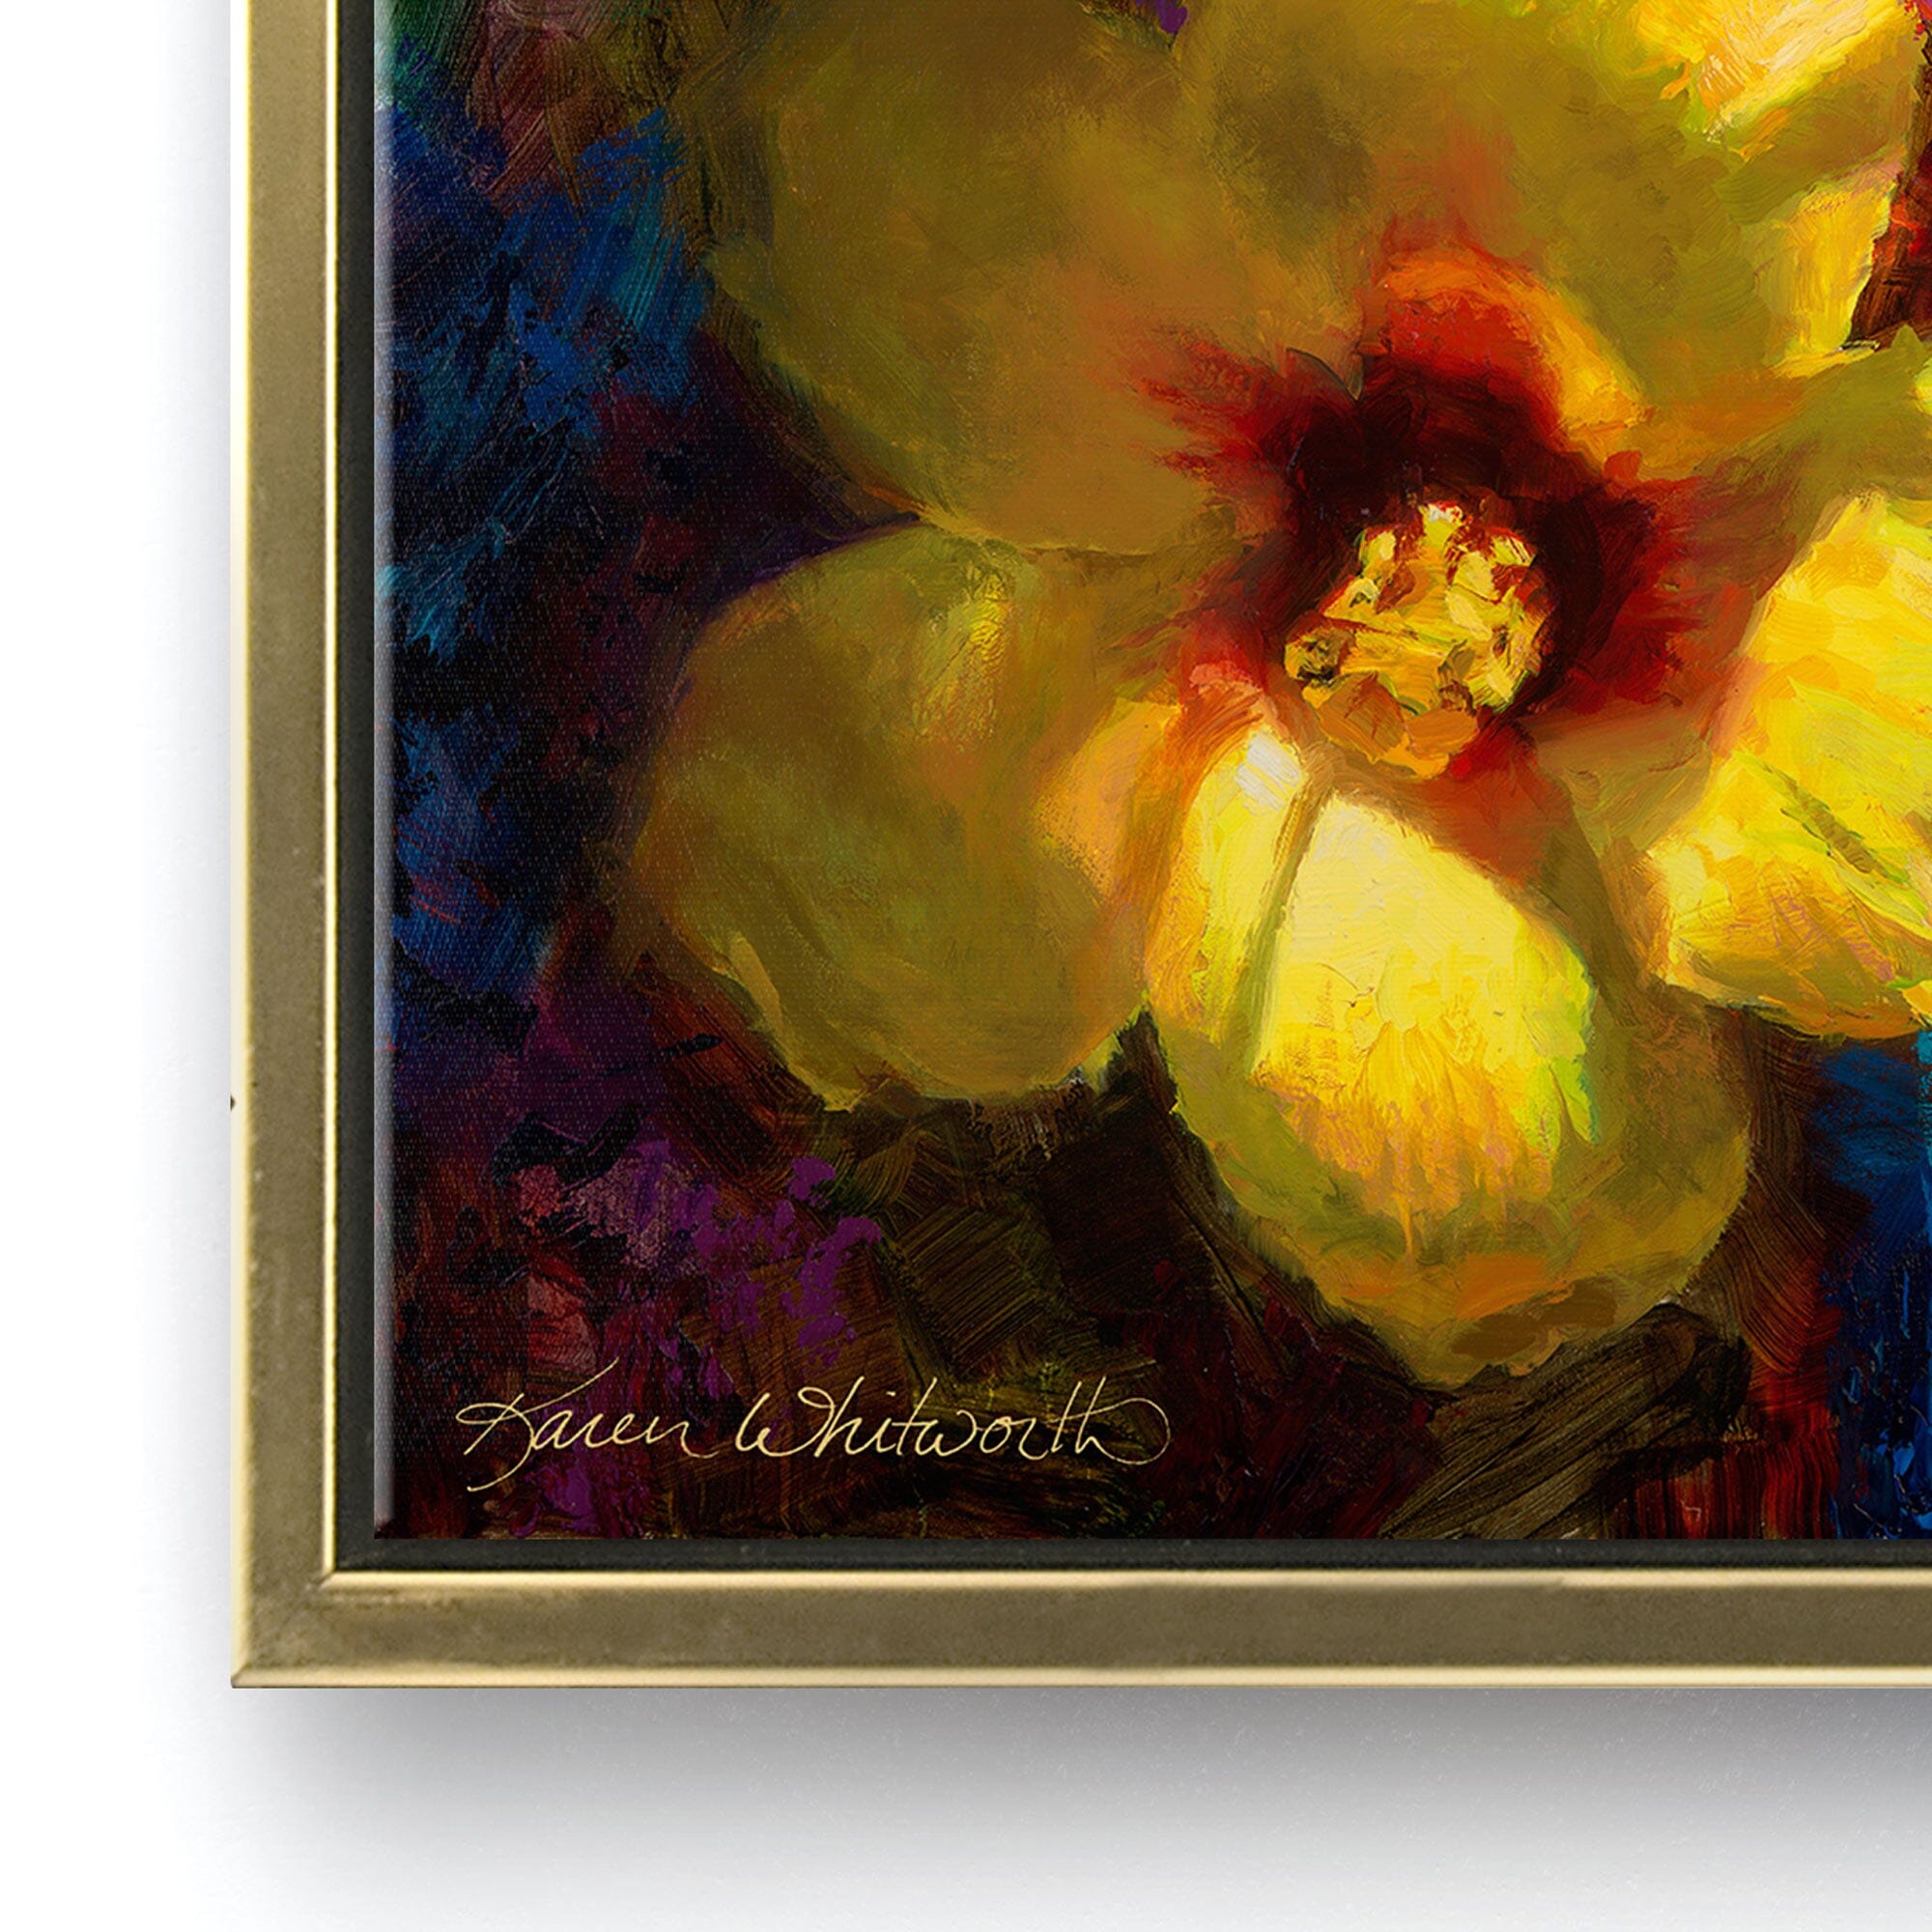 Detail shot depicting the corner portion of a hibiscus flower painting with a gold frame against a white wall.